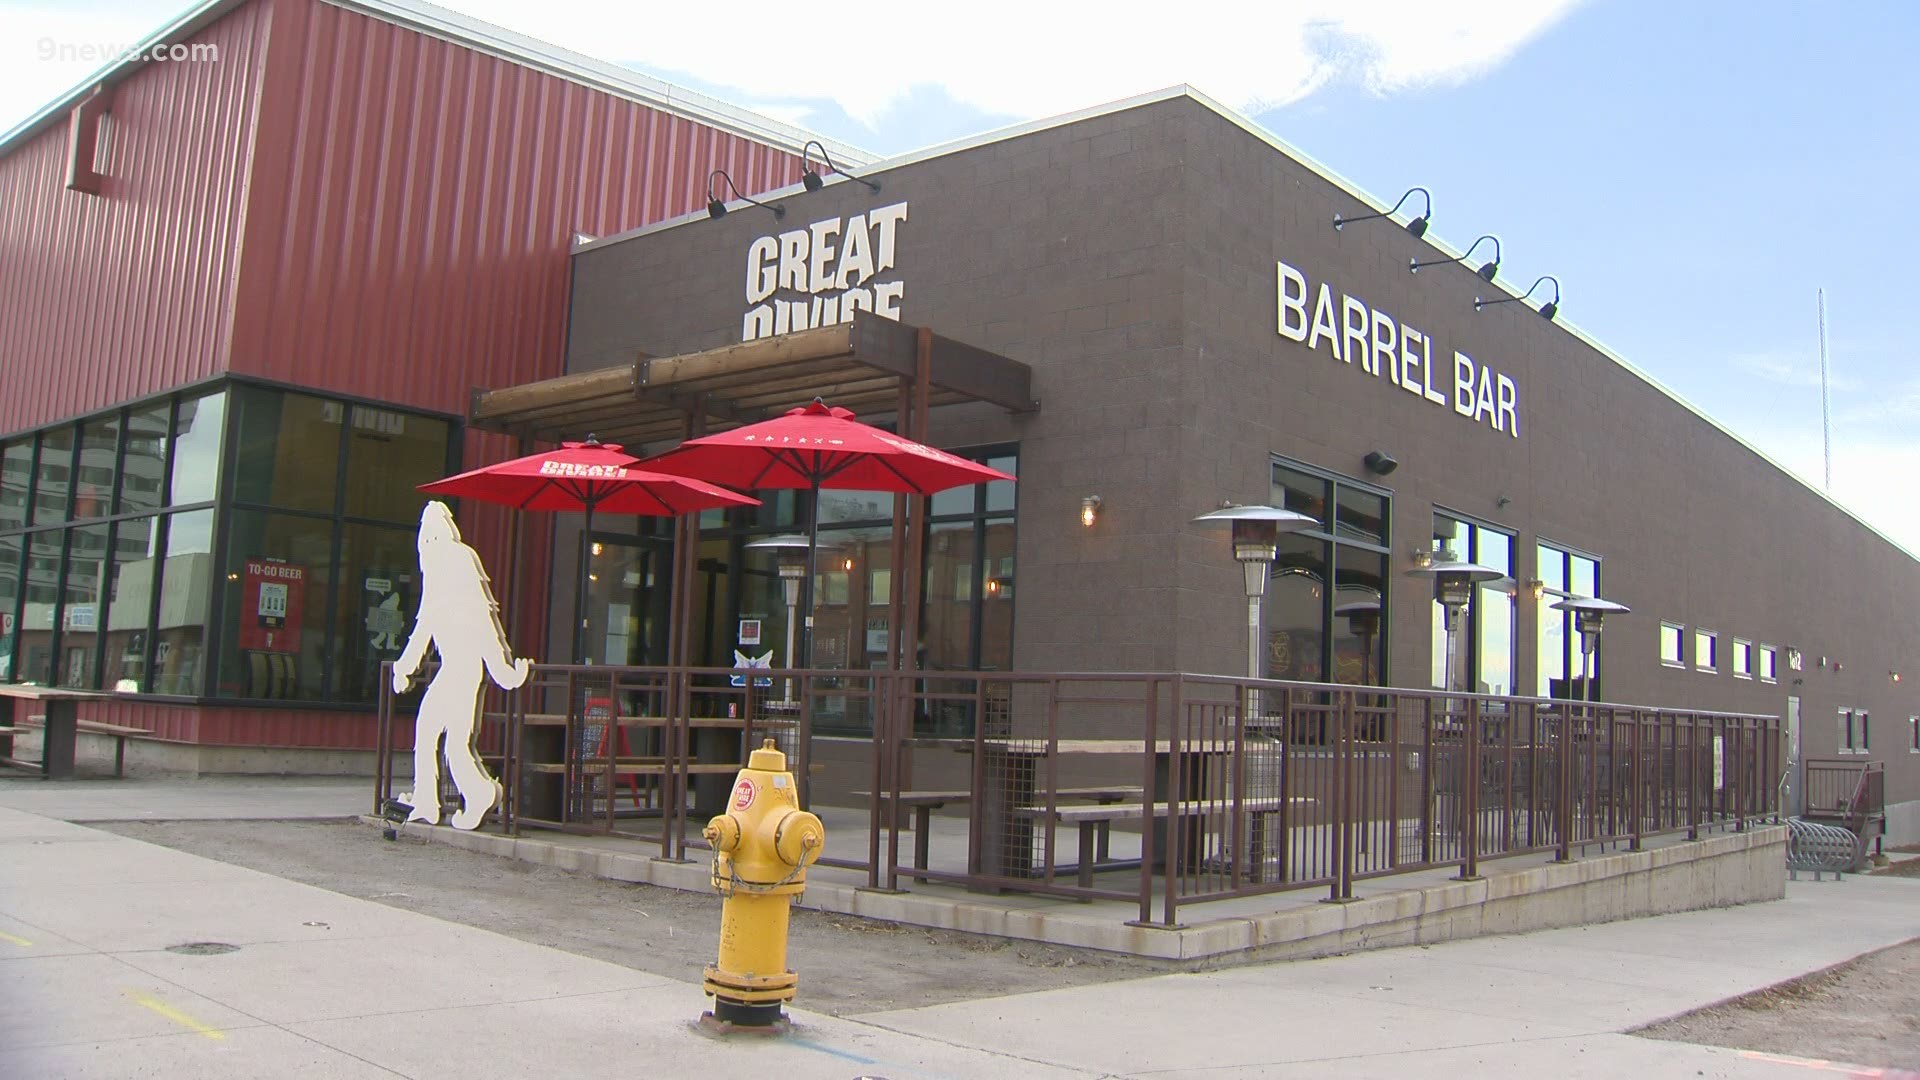 The brewer said it will put the Barrel Bar and Packaging Hall up for sale and consolidate operations at its original Ballpark neighborhood location.